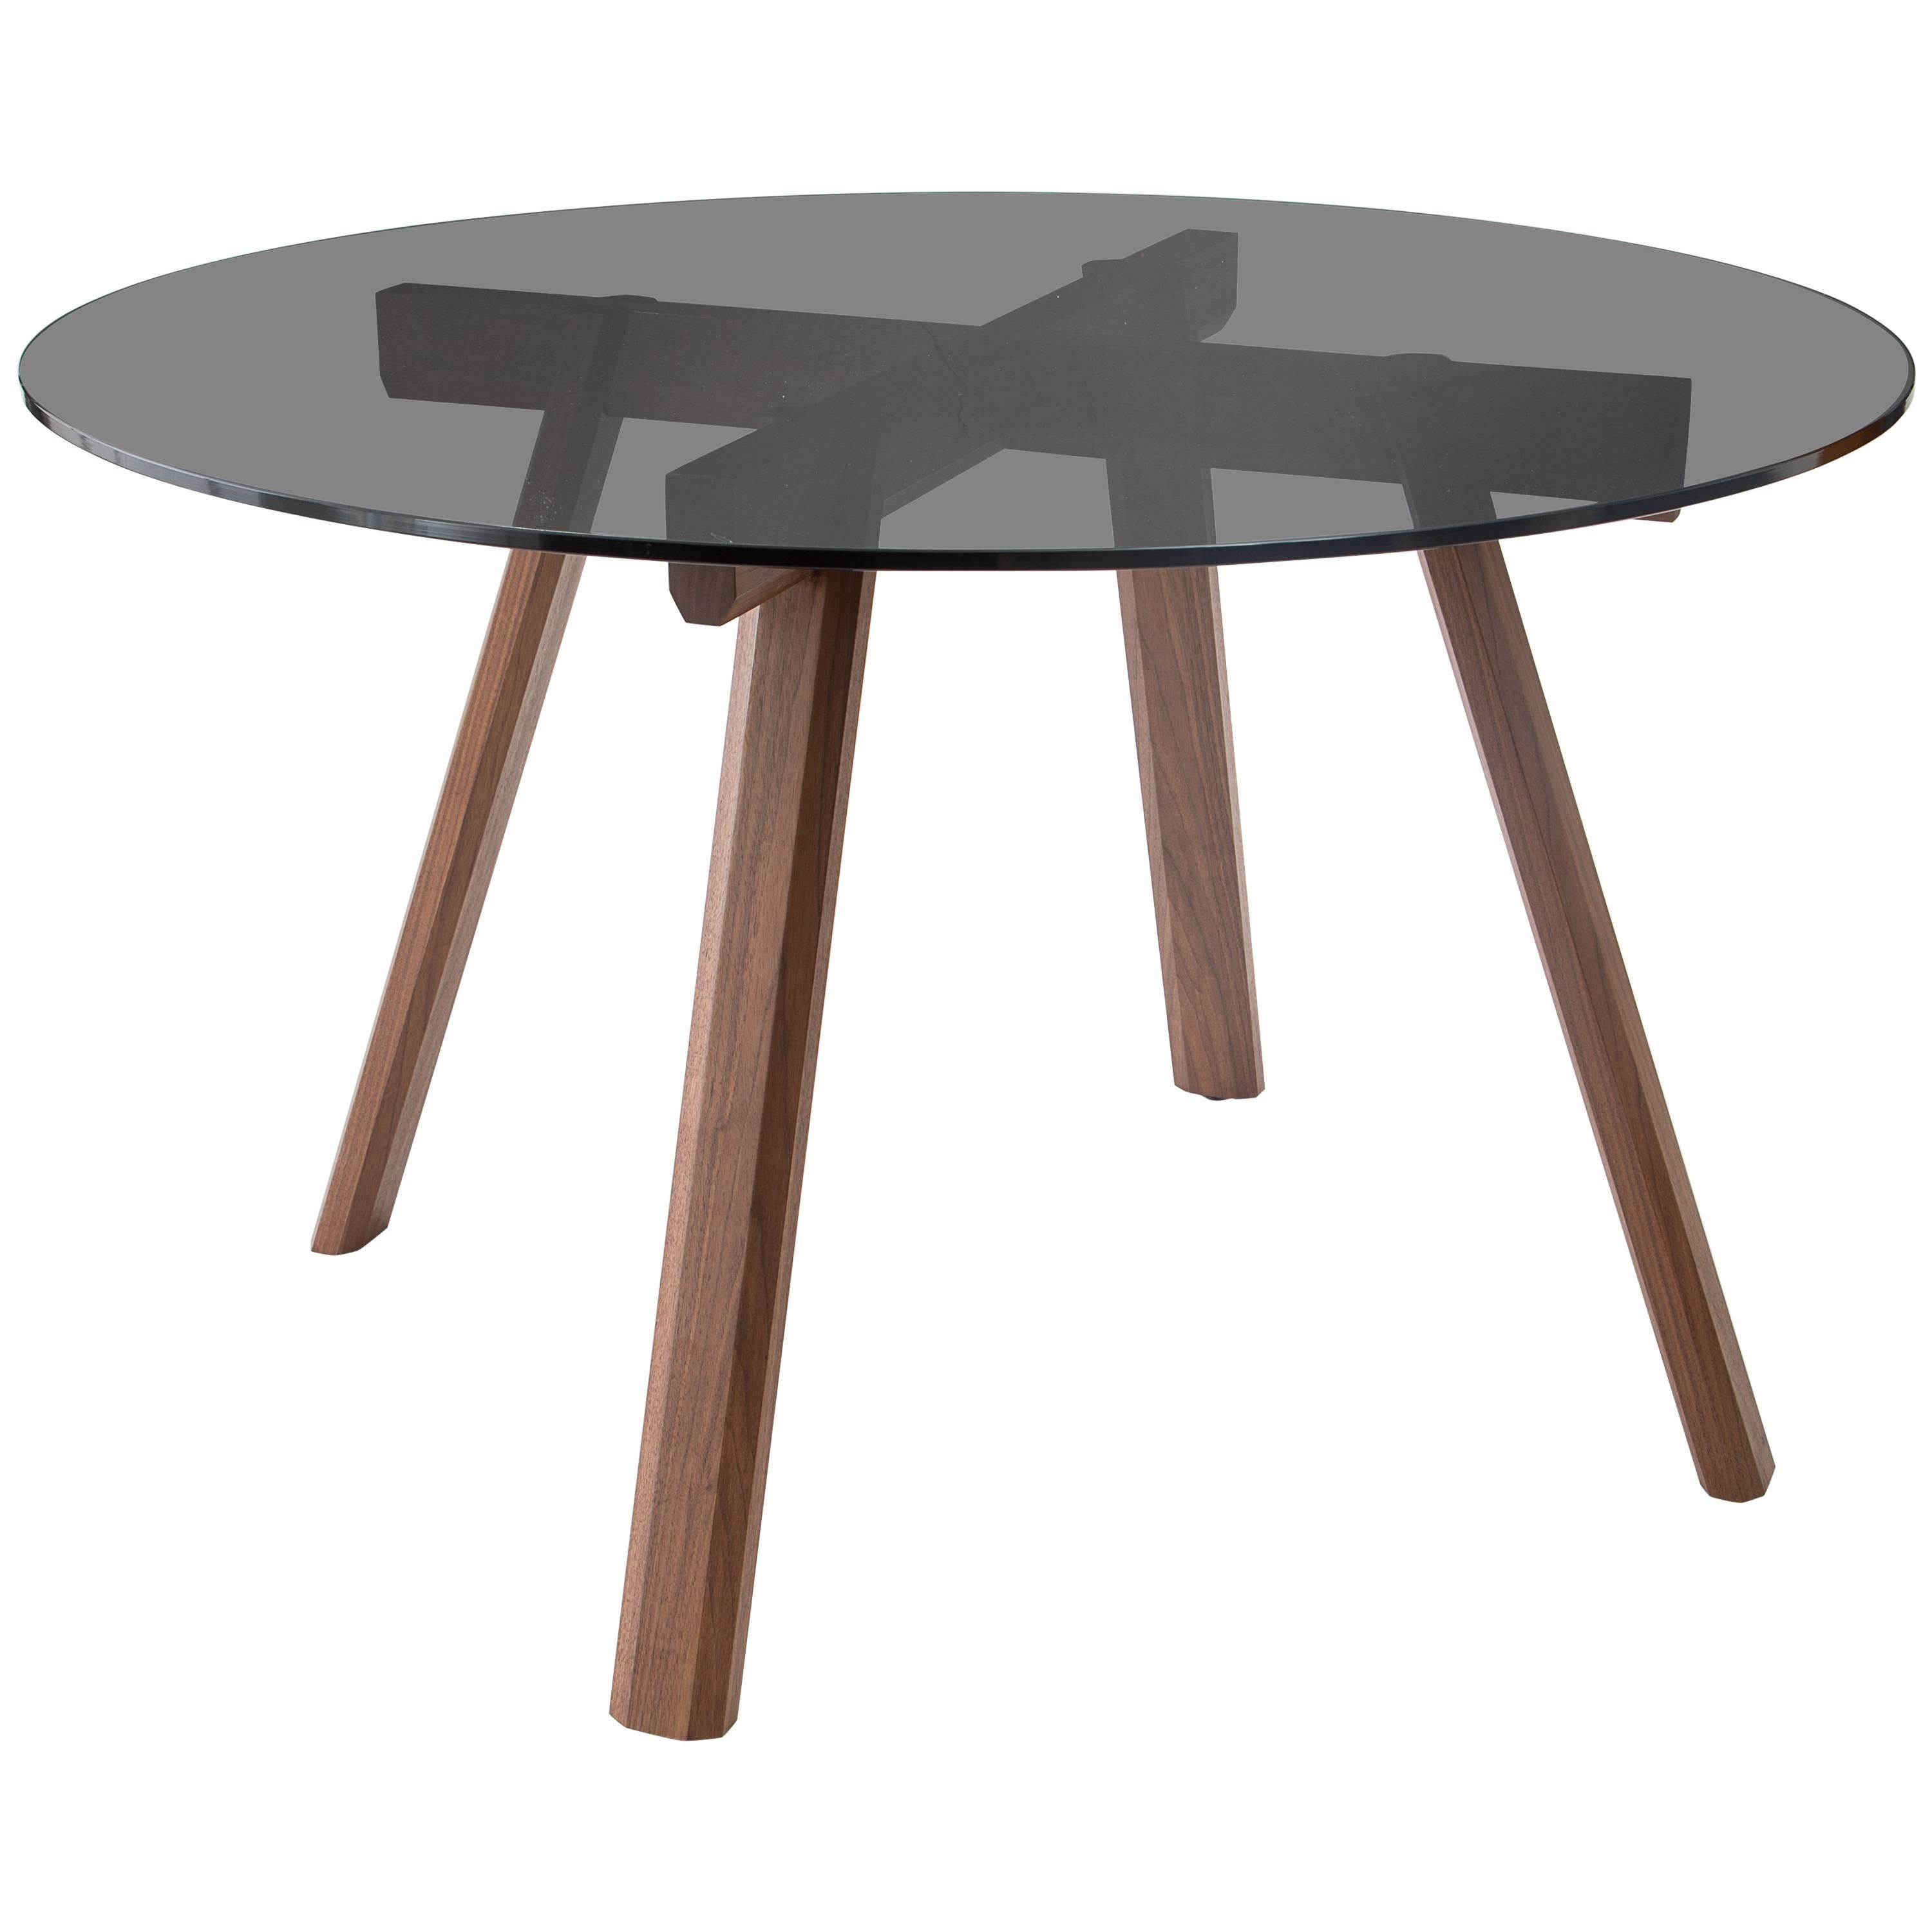 Ripley Dining Table, Solid Walnut and Smoked Glass